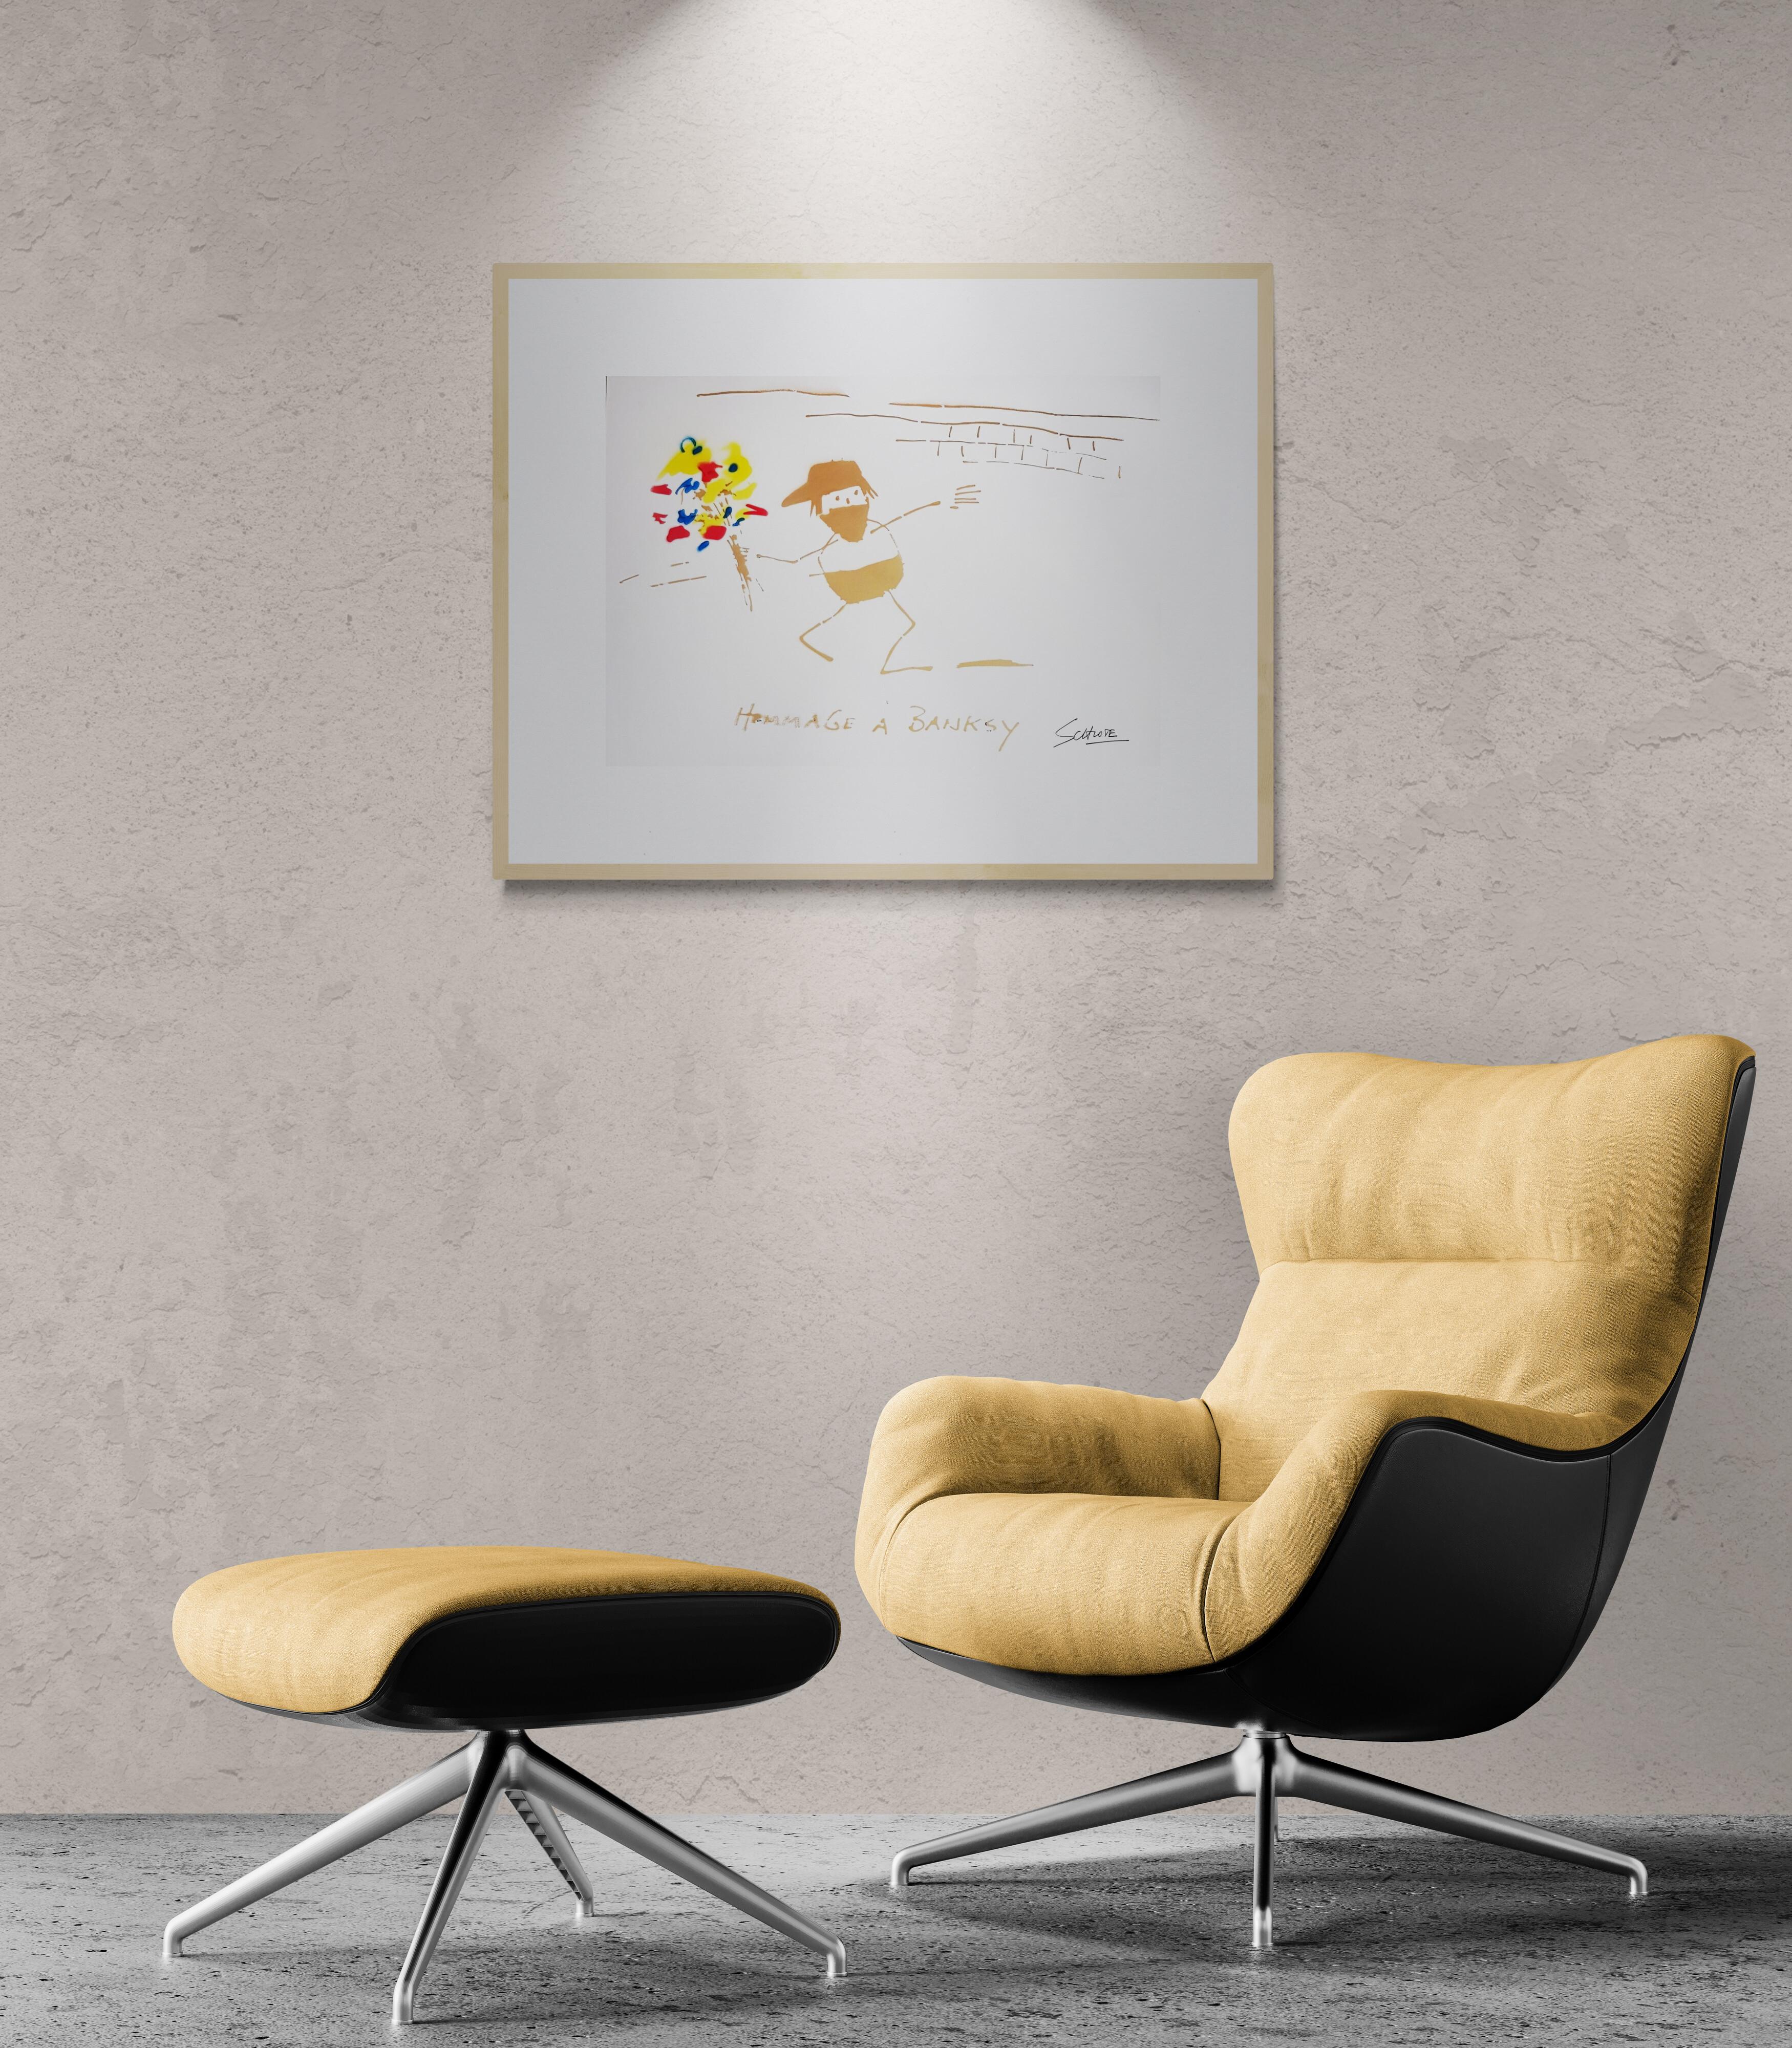 Hommage à Banksy (with yellow, blue and red Flowers, 30% OFF LIST PRICE) - Street Art Print by Wilhelm Schlote